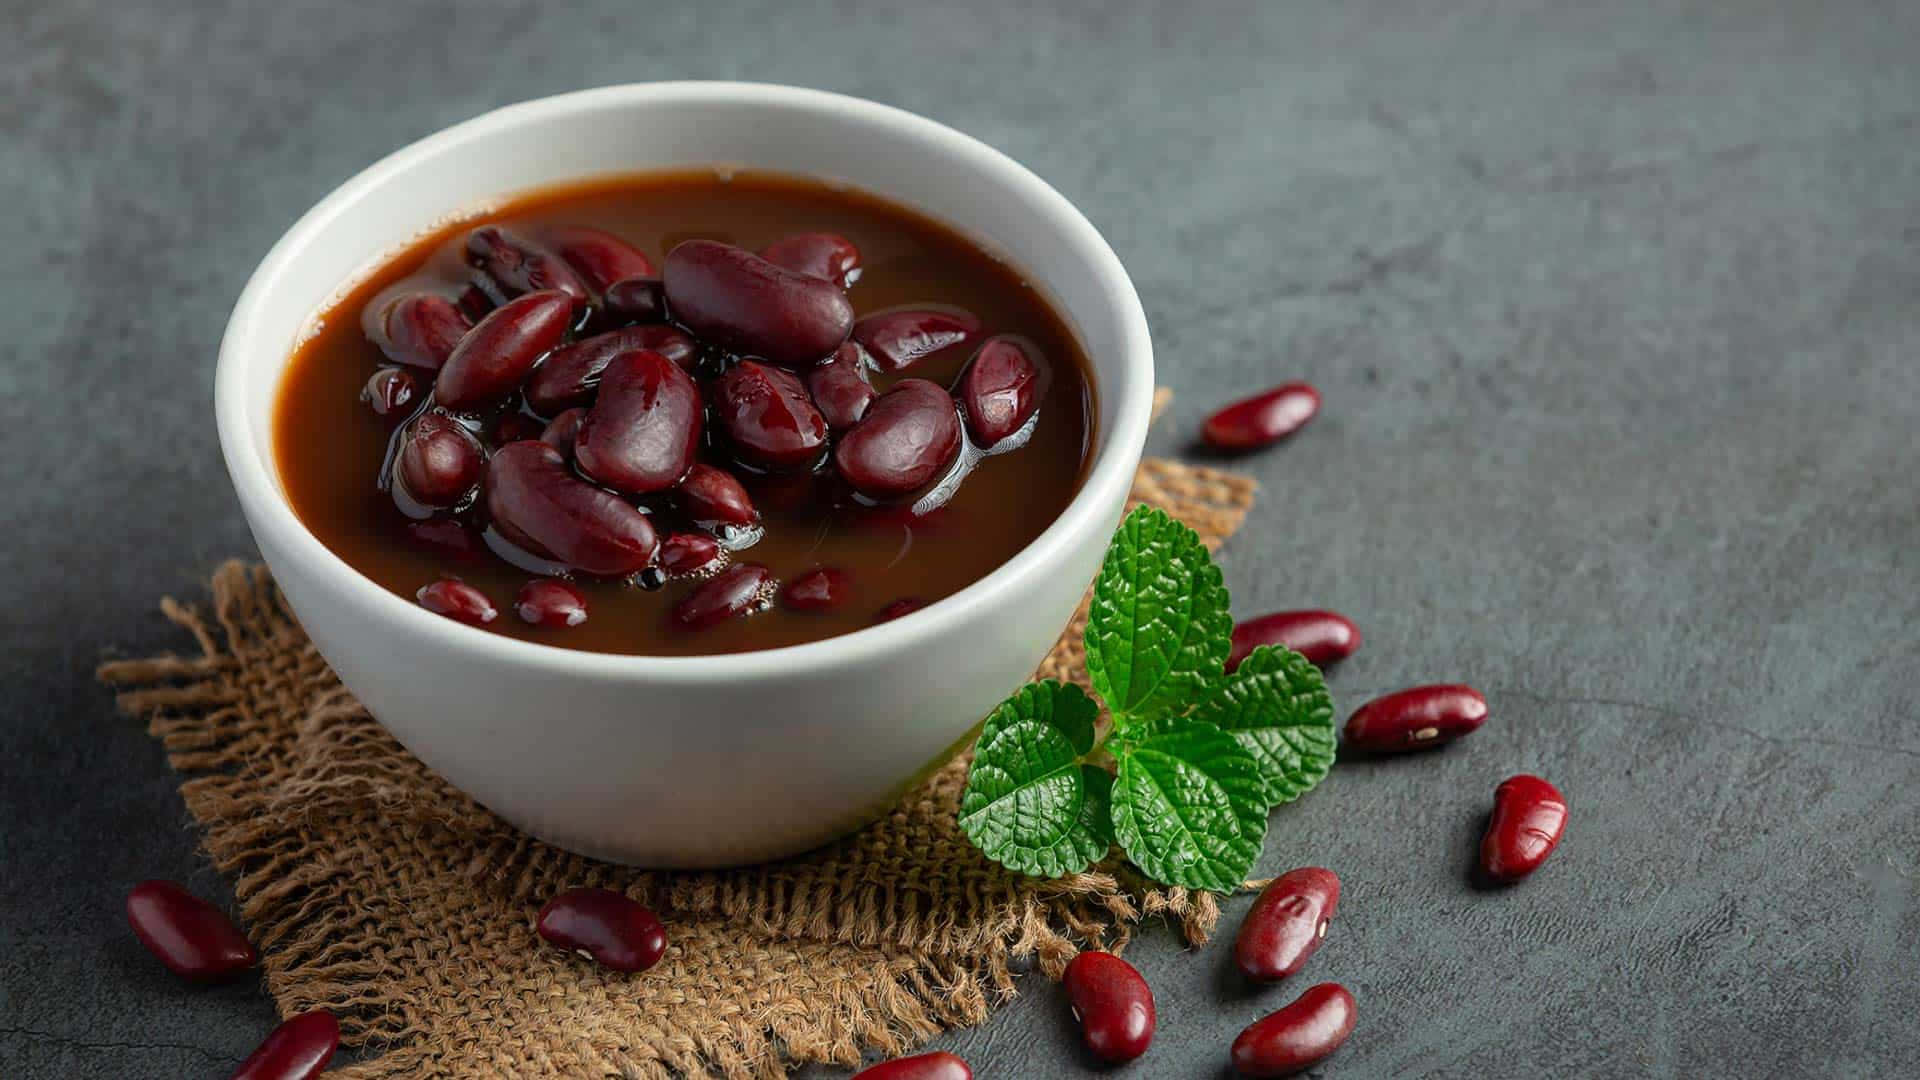 Delicious Red Beans in a Bowl Wallpaper